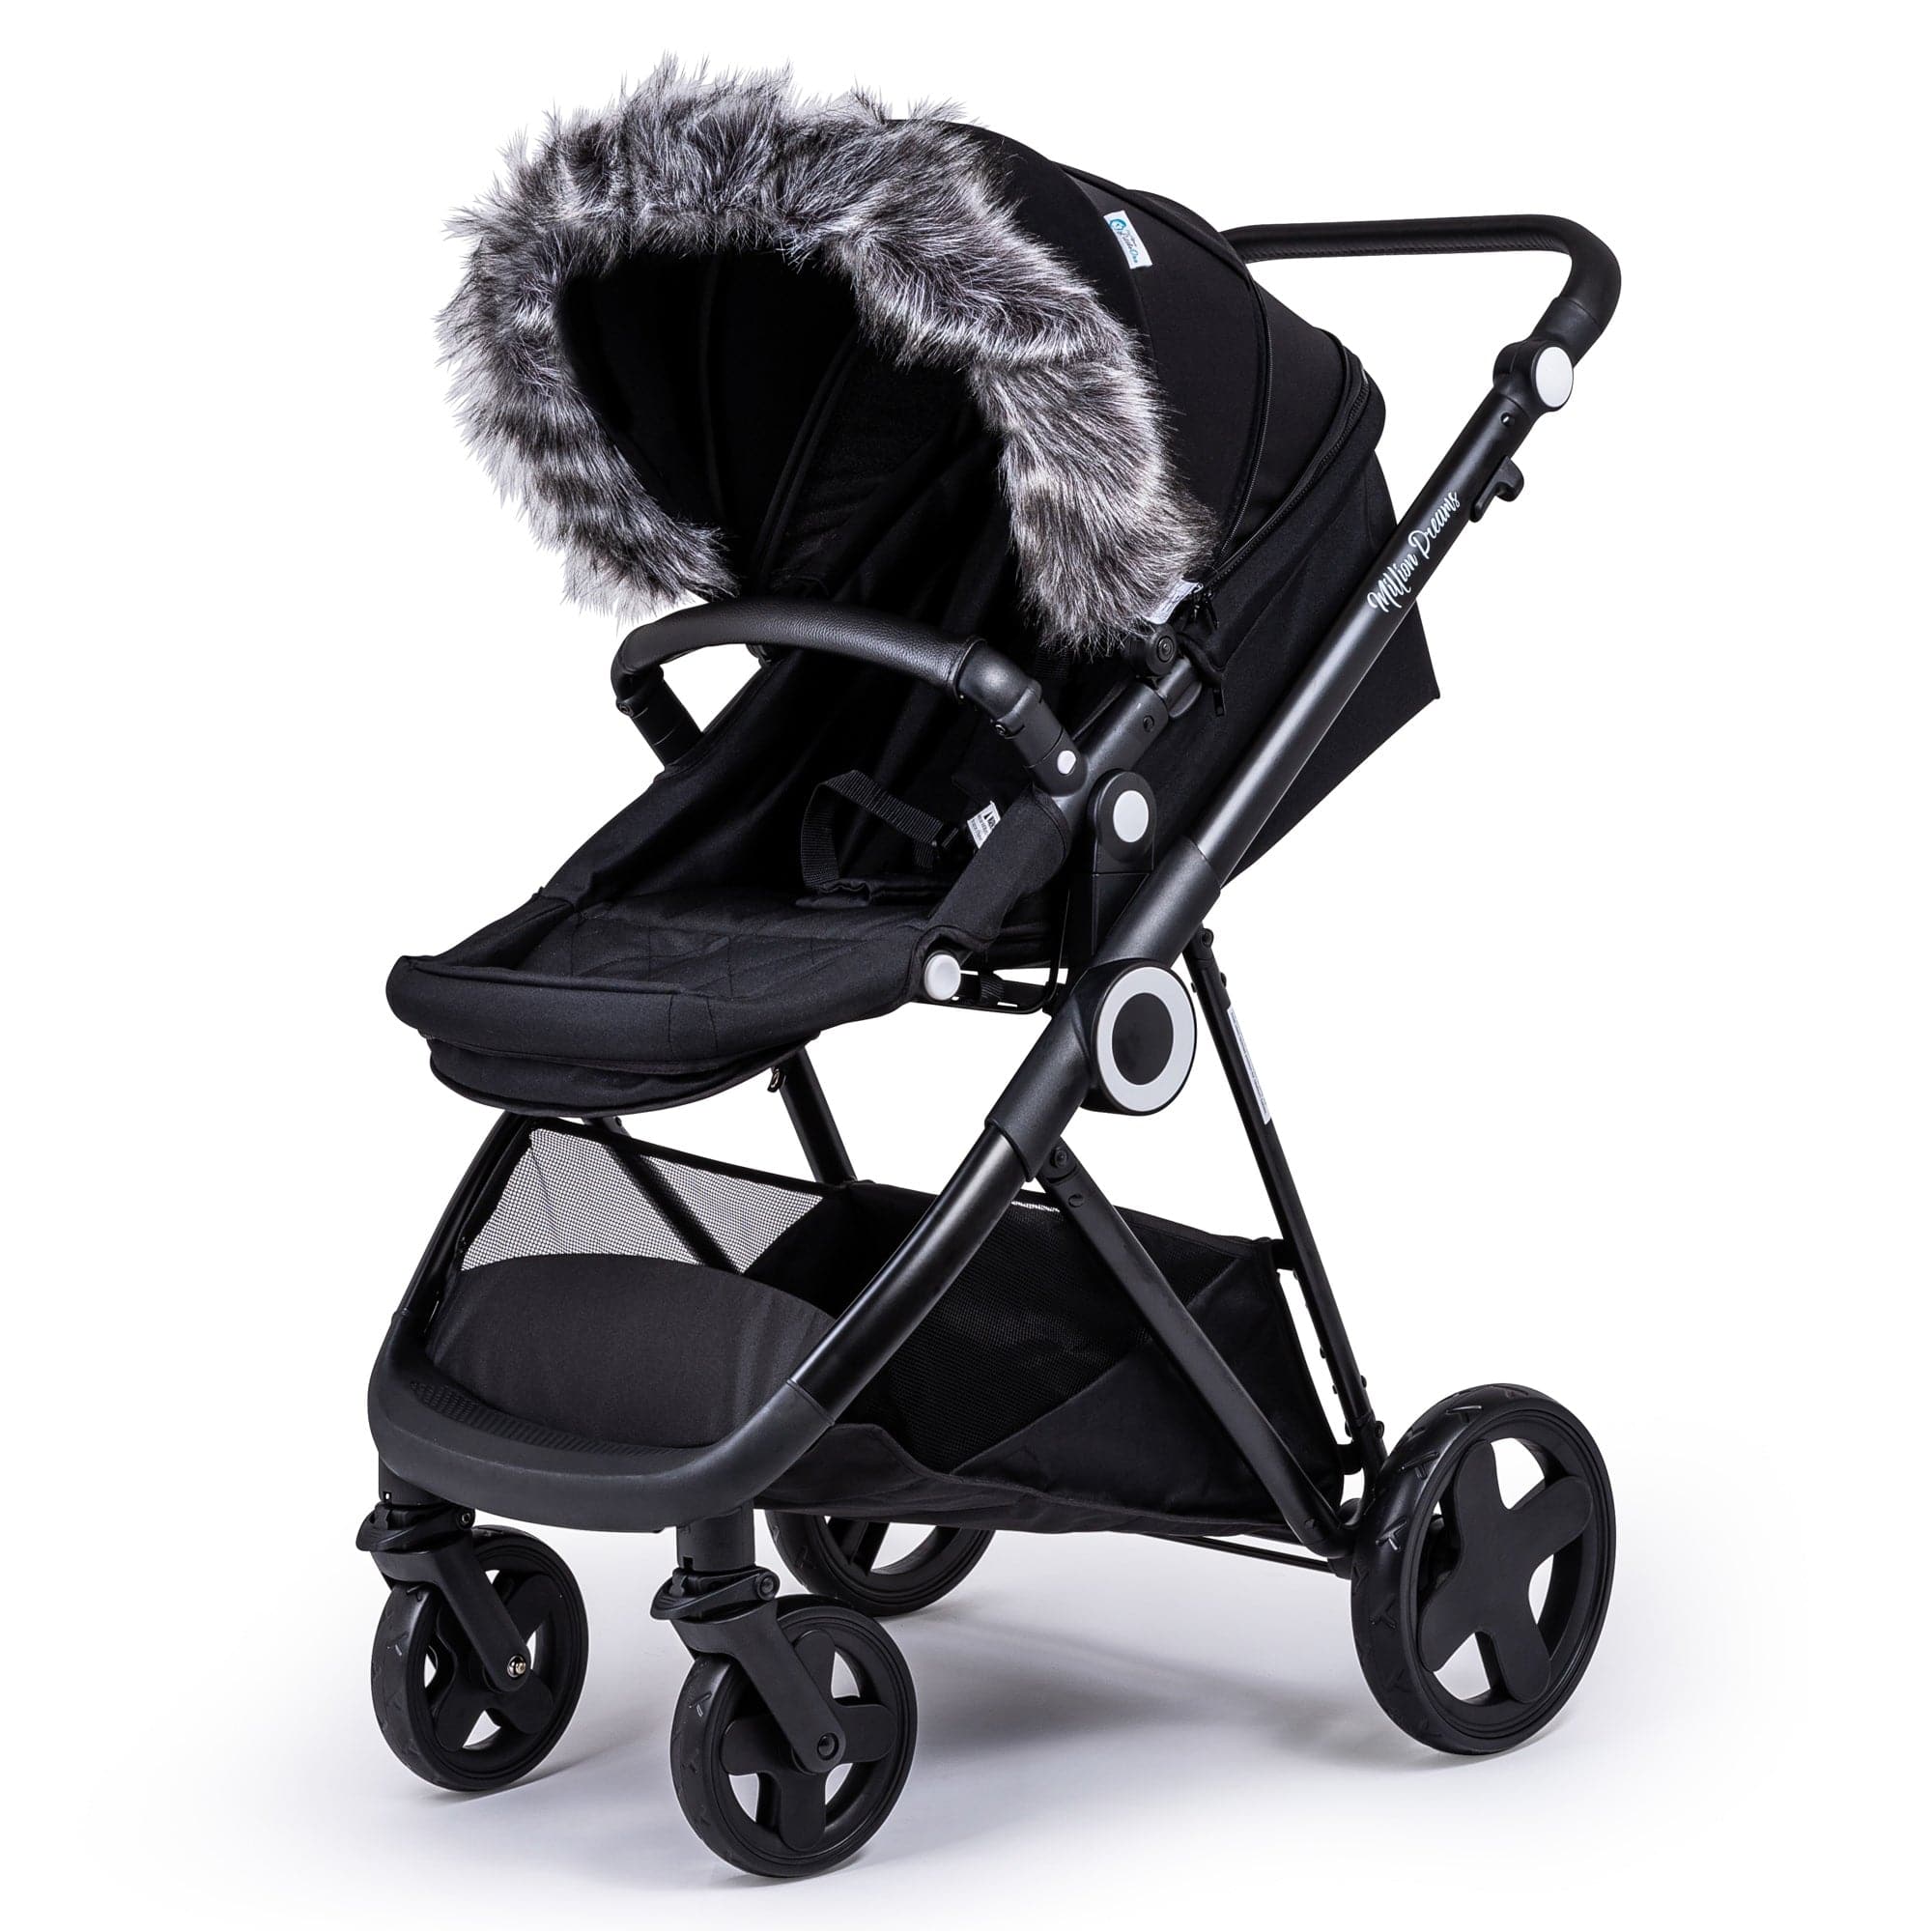 Pram Fur Hood Trim Attachment For Pushchair Compatible with Tutti Bambini - Dark Grey / Fits All Models | For Your Little One